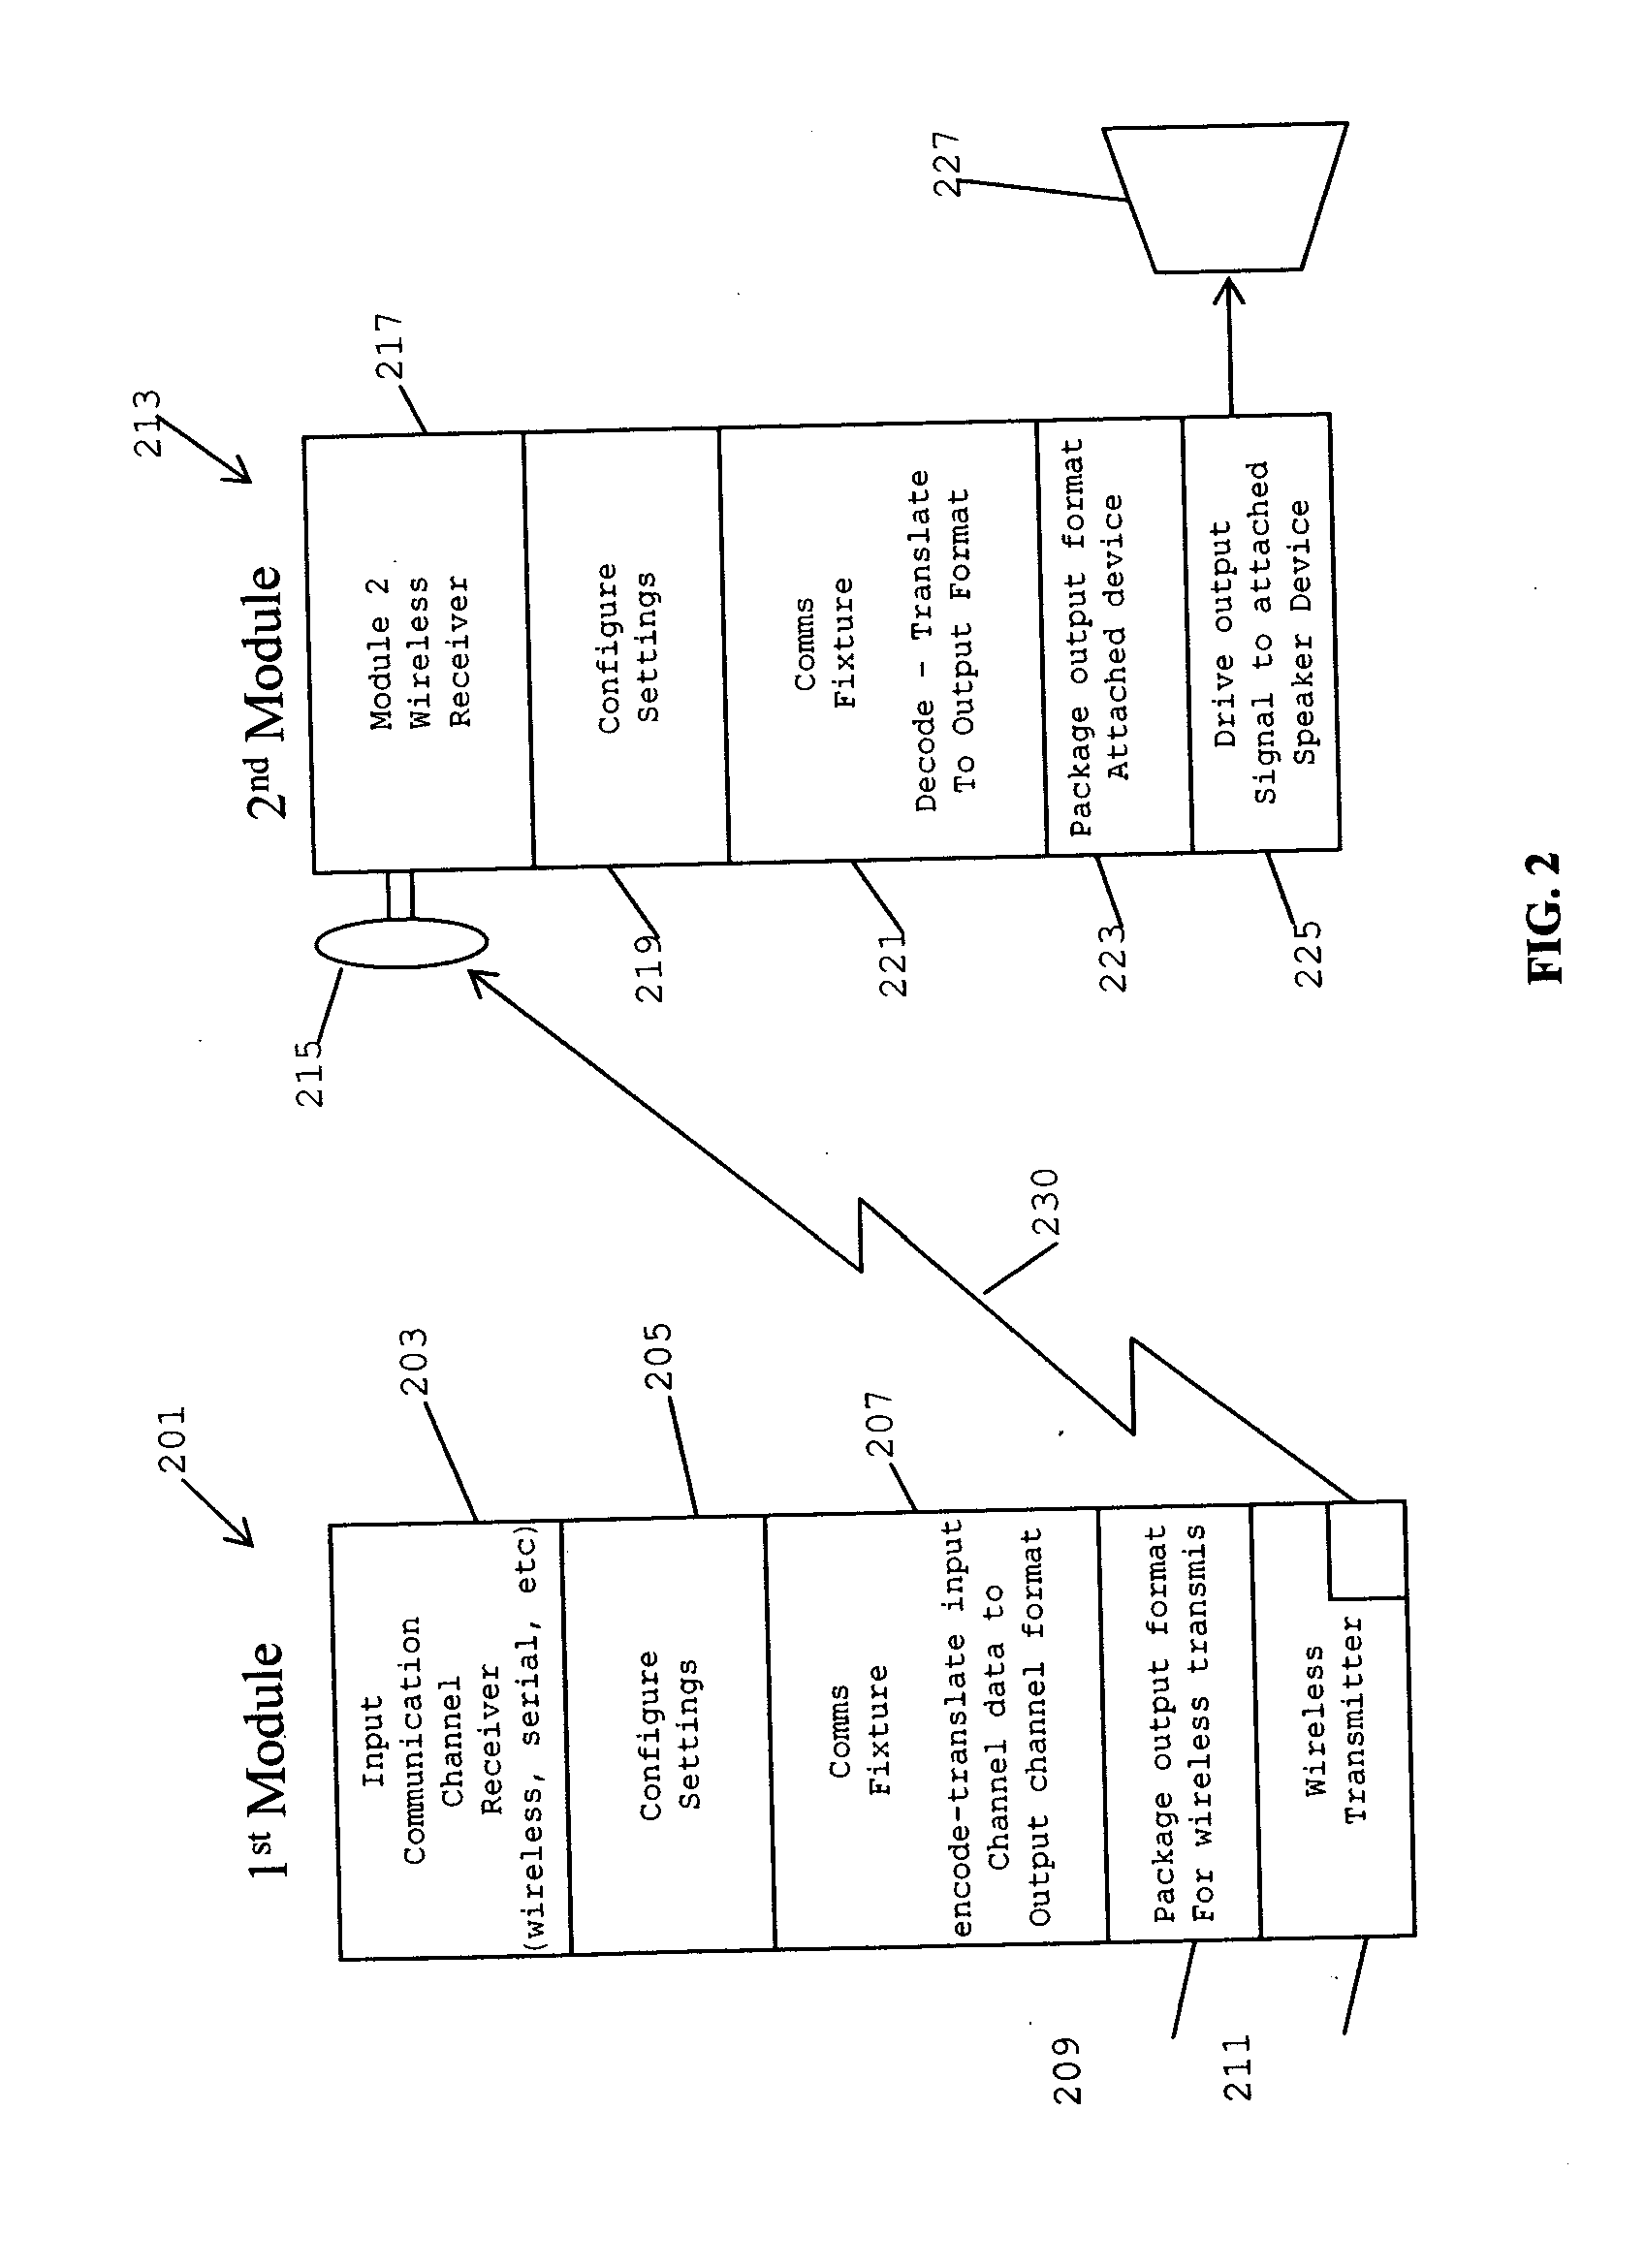 Method and system for providing wireless communications between electronic devices